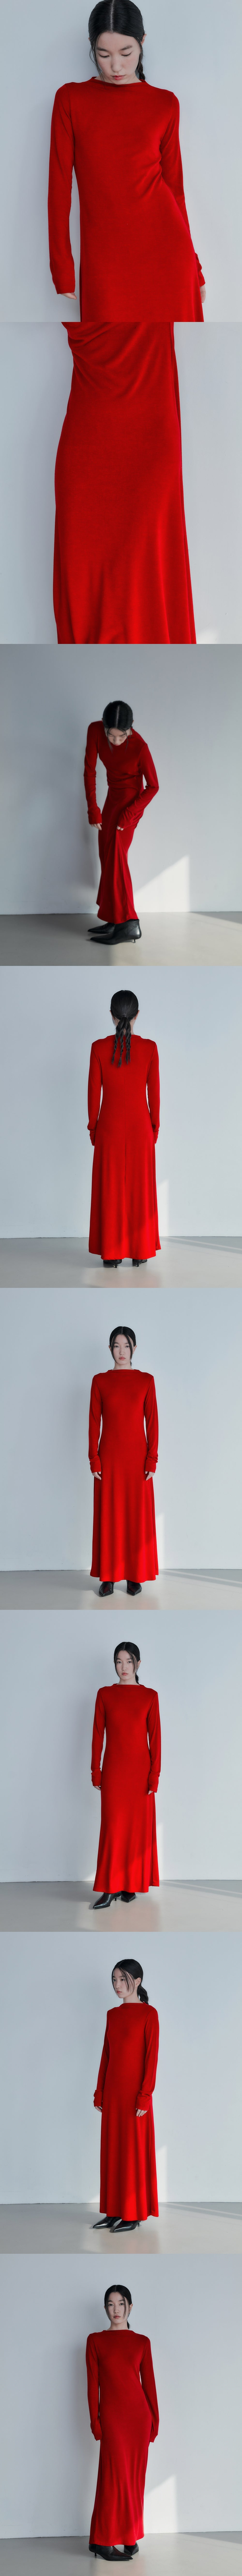  WINTER HOLIDAY DRESS (RED)